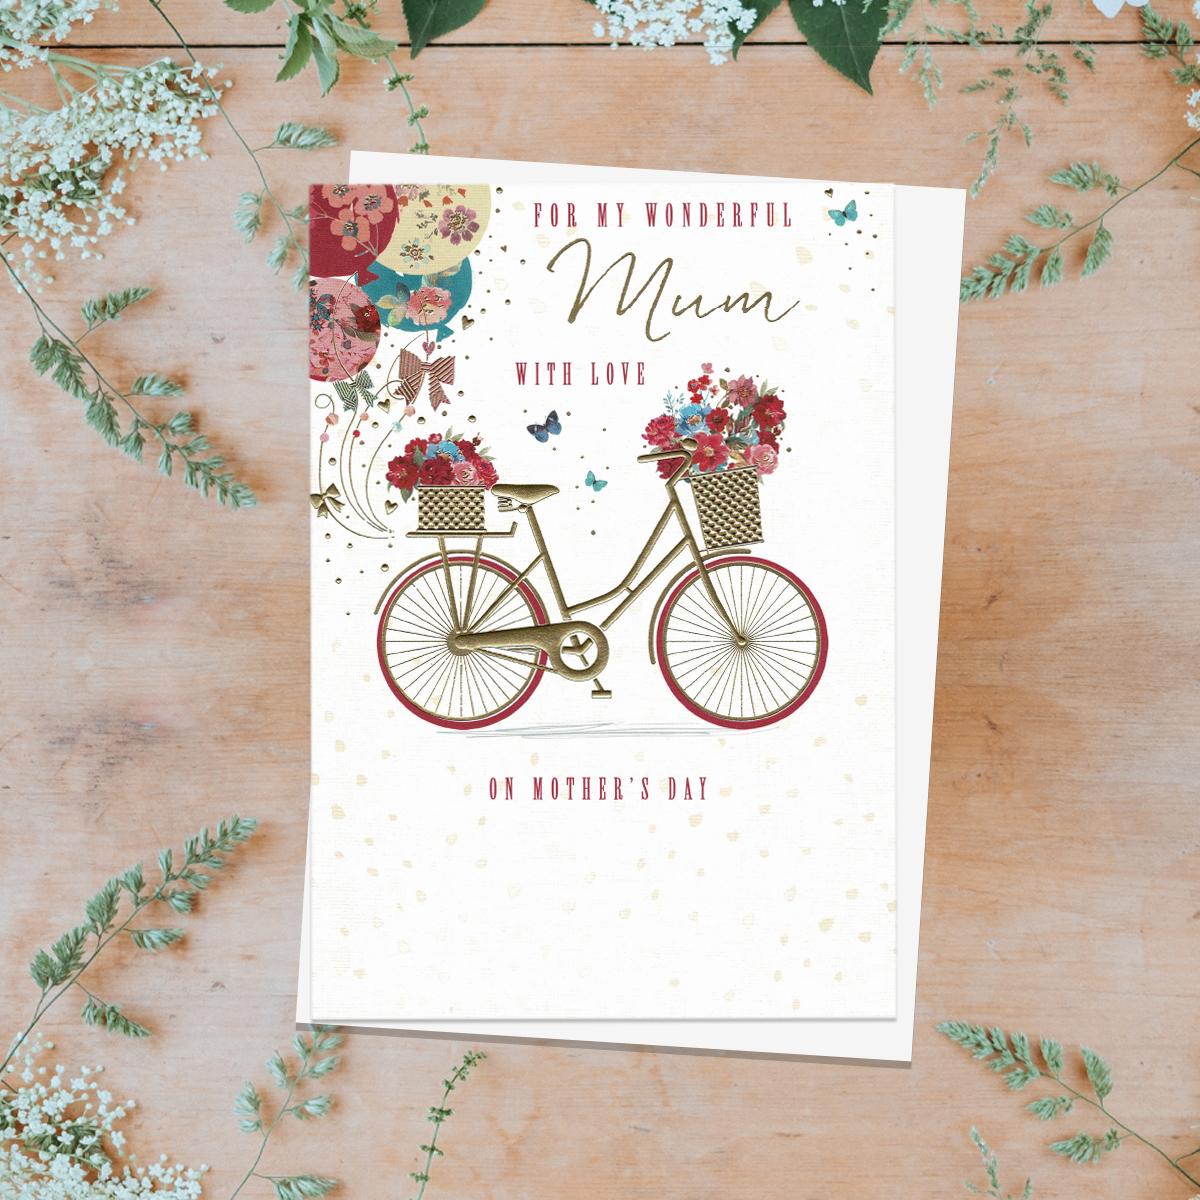 'For My Wonderful Mum With Love On Mother's Day' Showing A Beautiful Bicycle Filled With Flowers. Stunning Gold Foil Detail And White Envelope